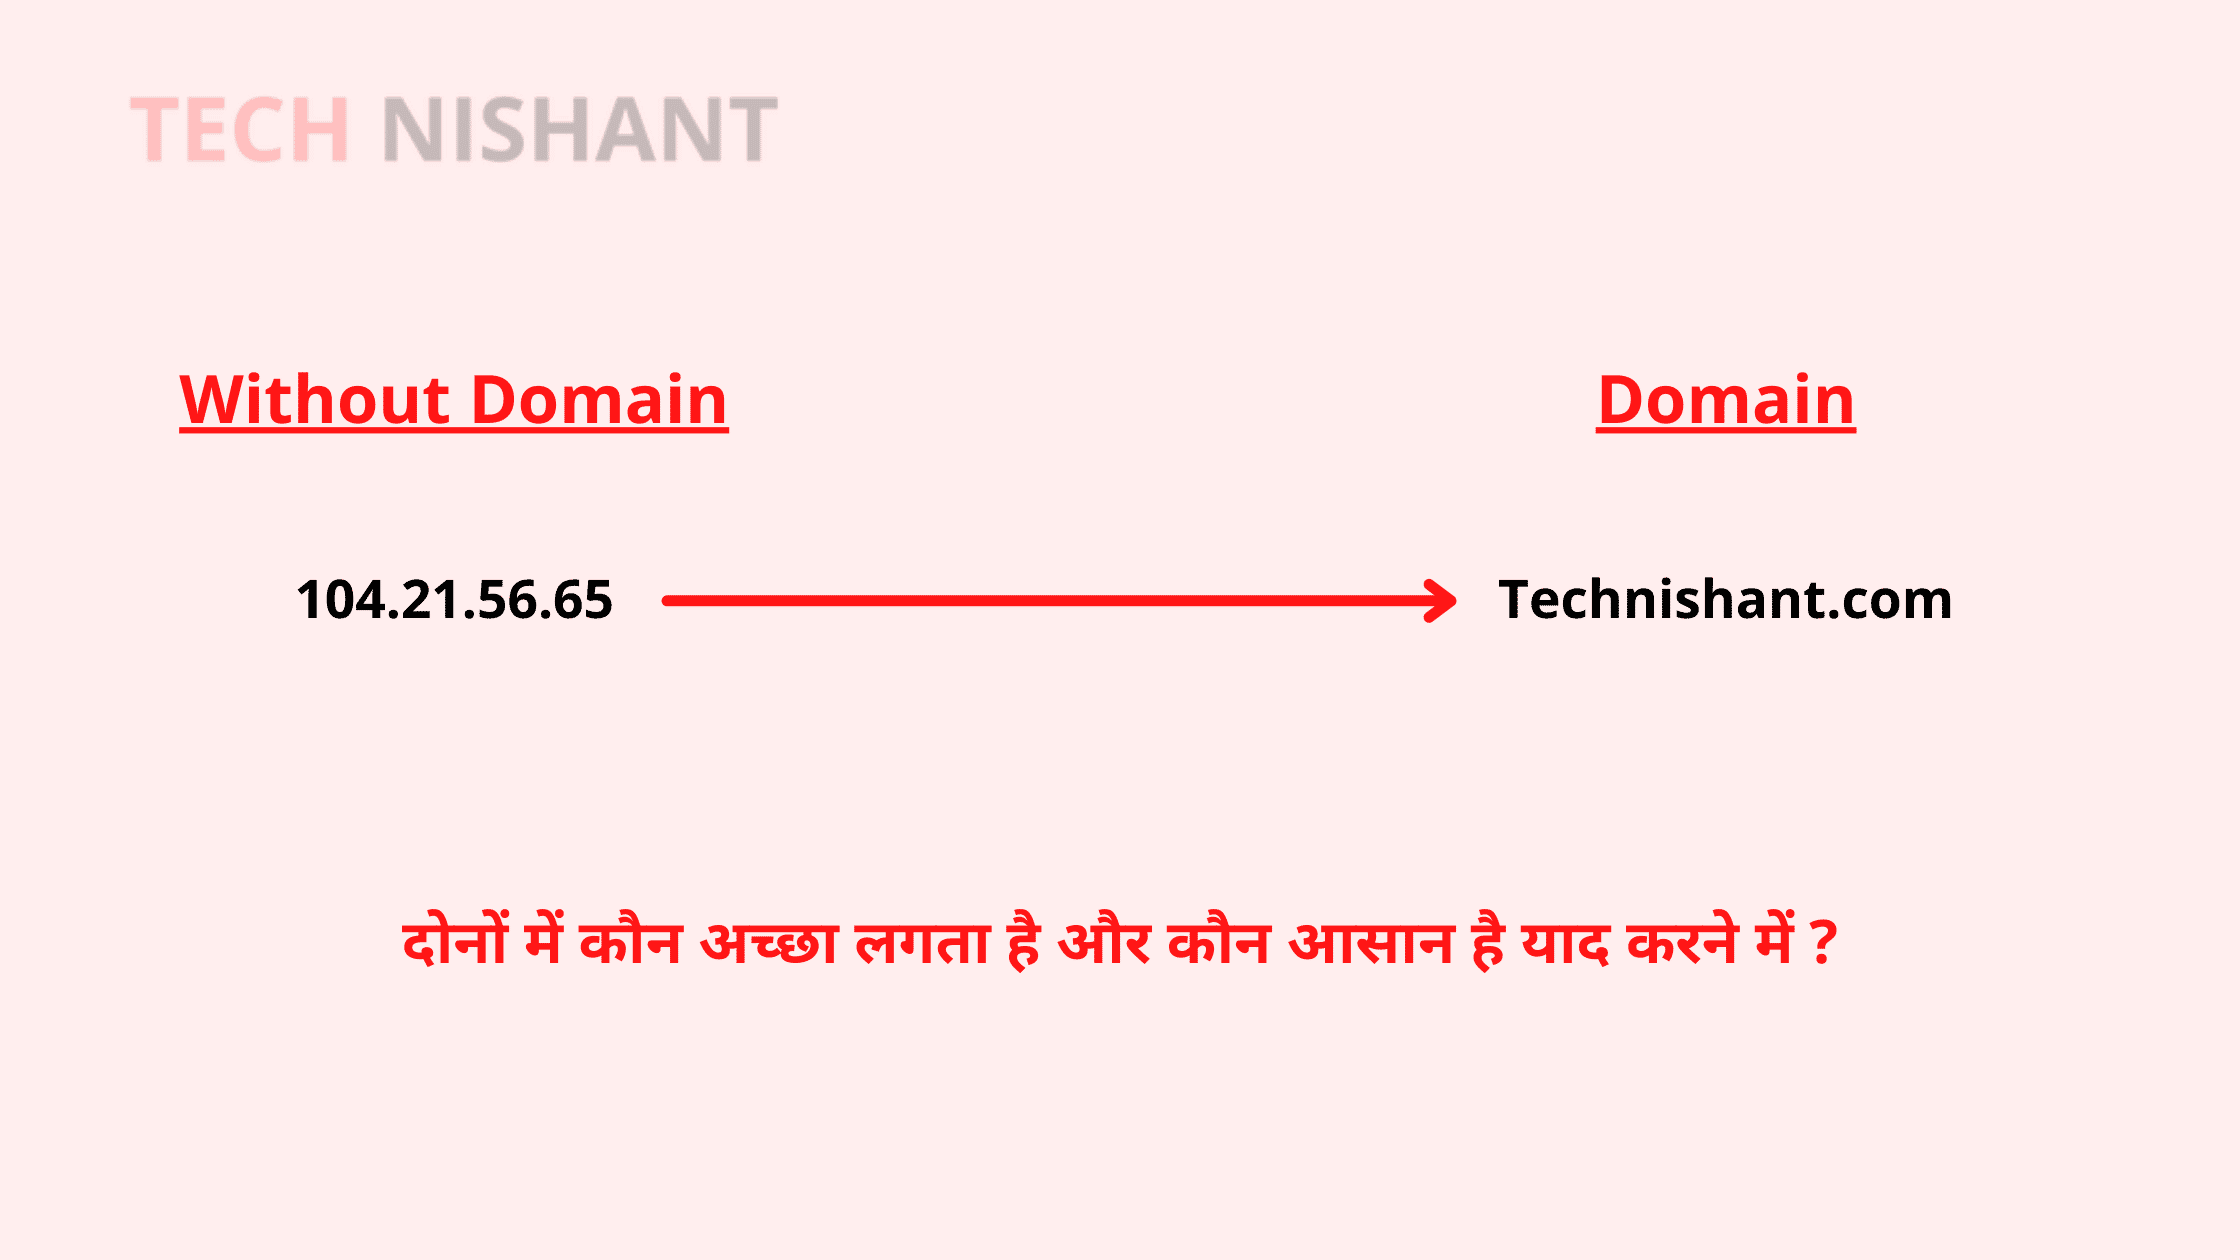 Domain meaning in hindi